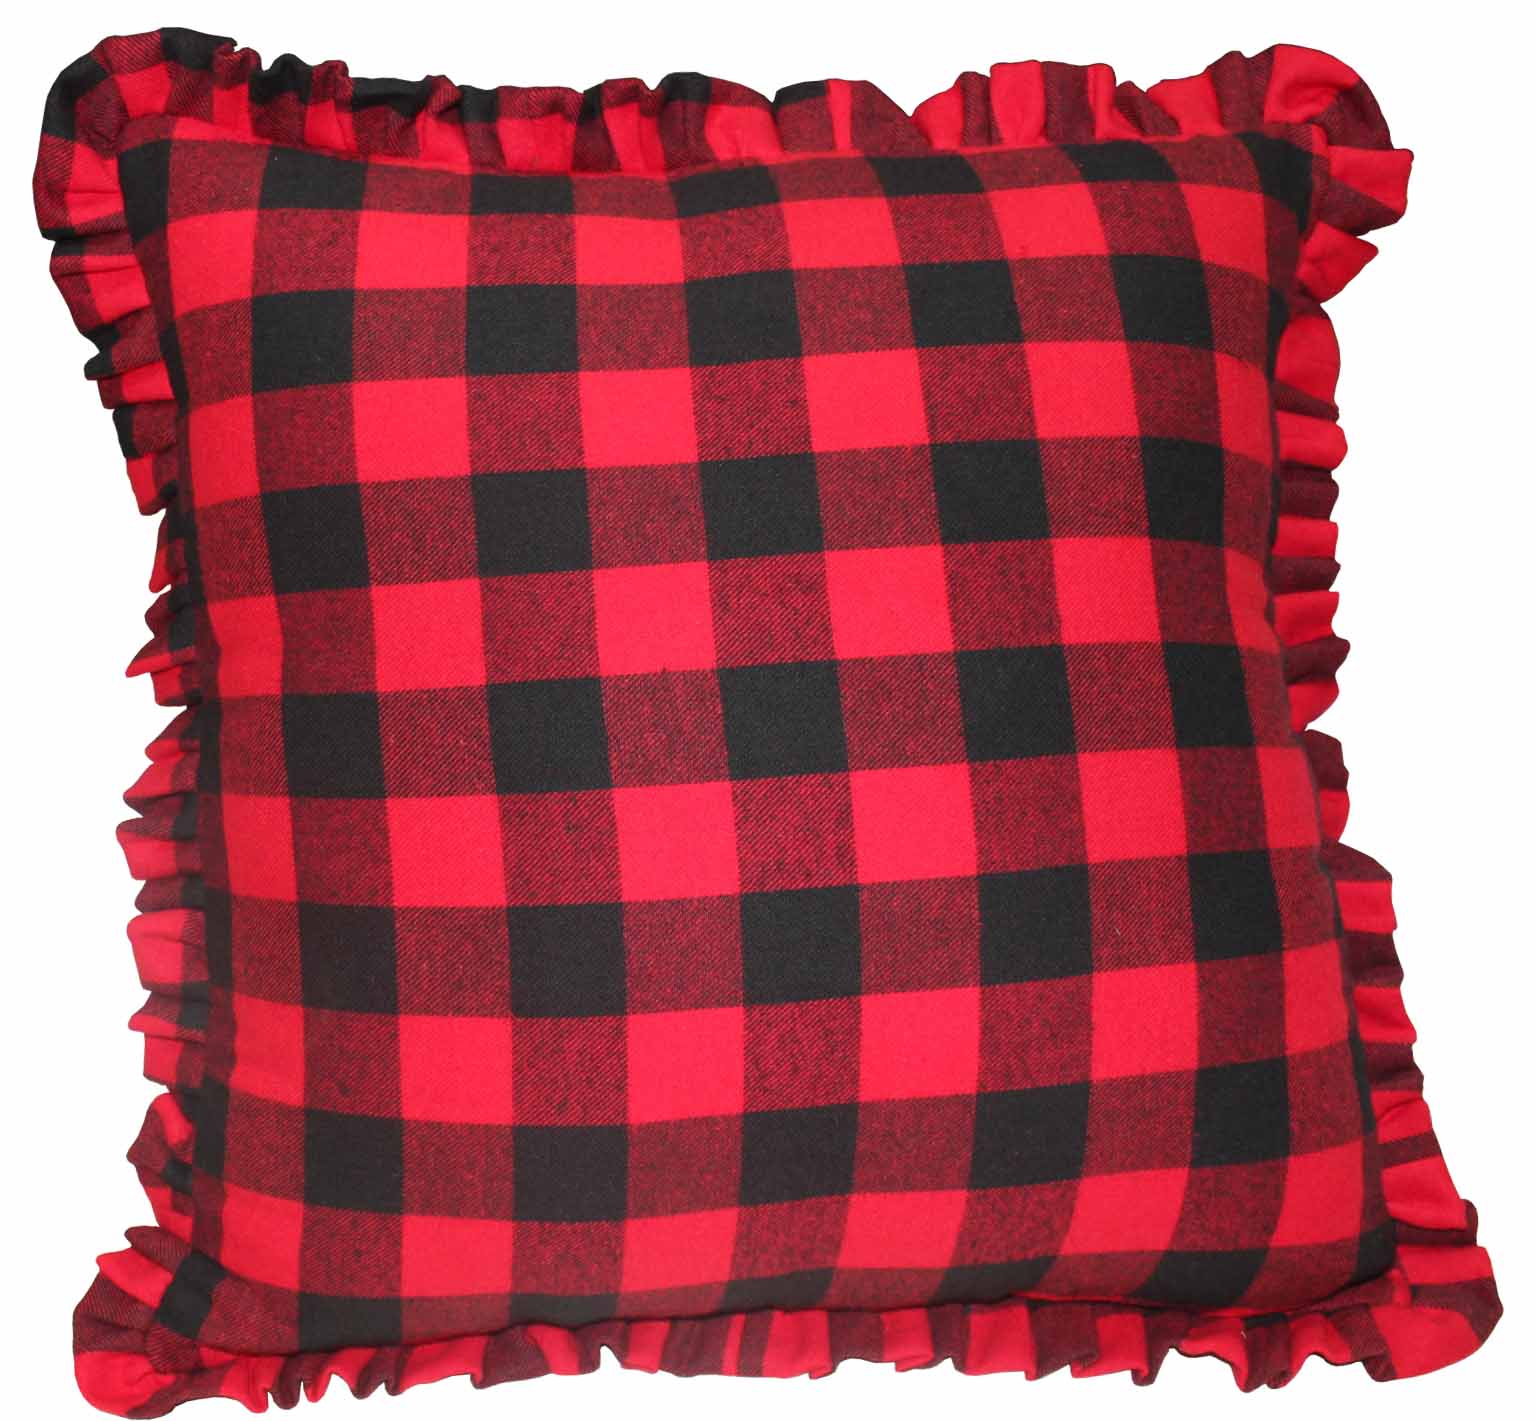 Red and Black Twill Buffalo Check,Fabric Toss Pillow 16"W x 16"L,Ruffled